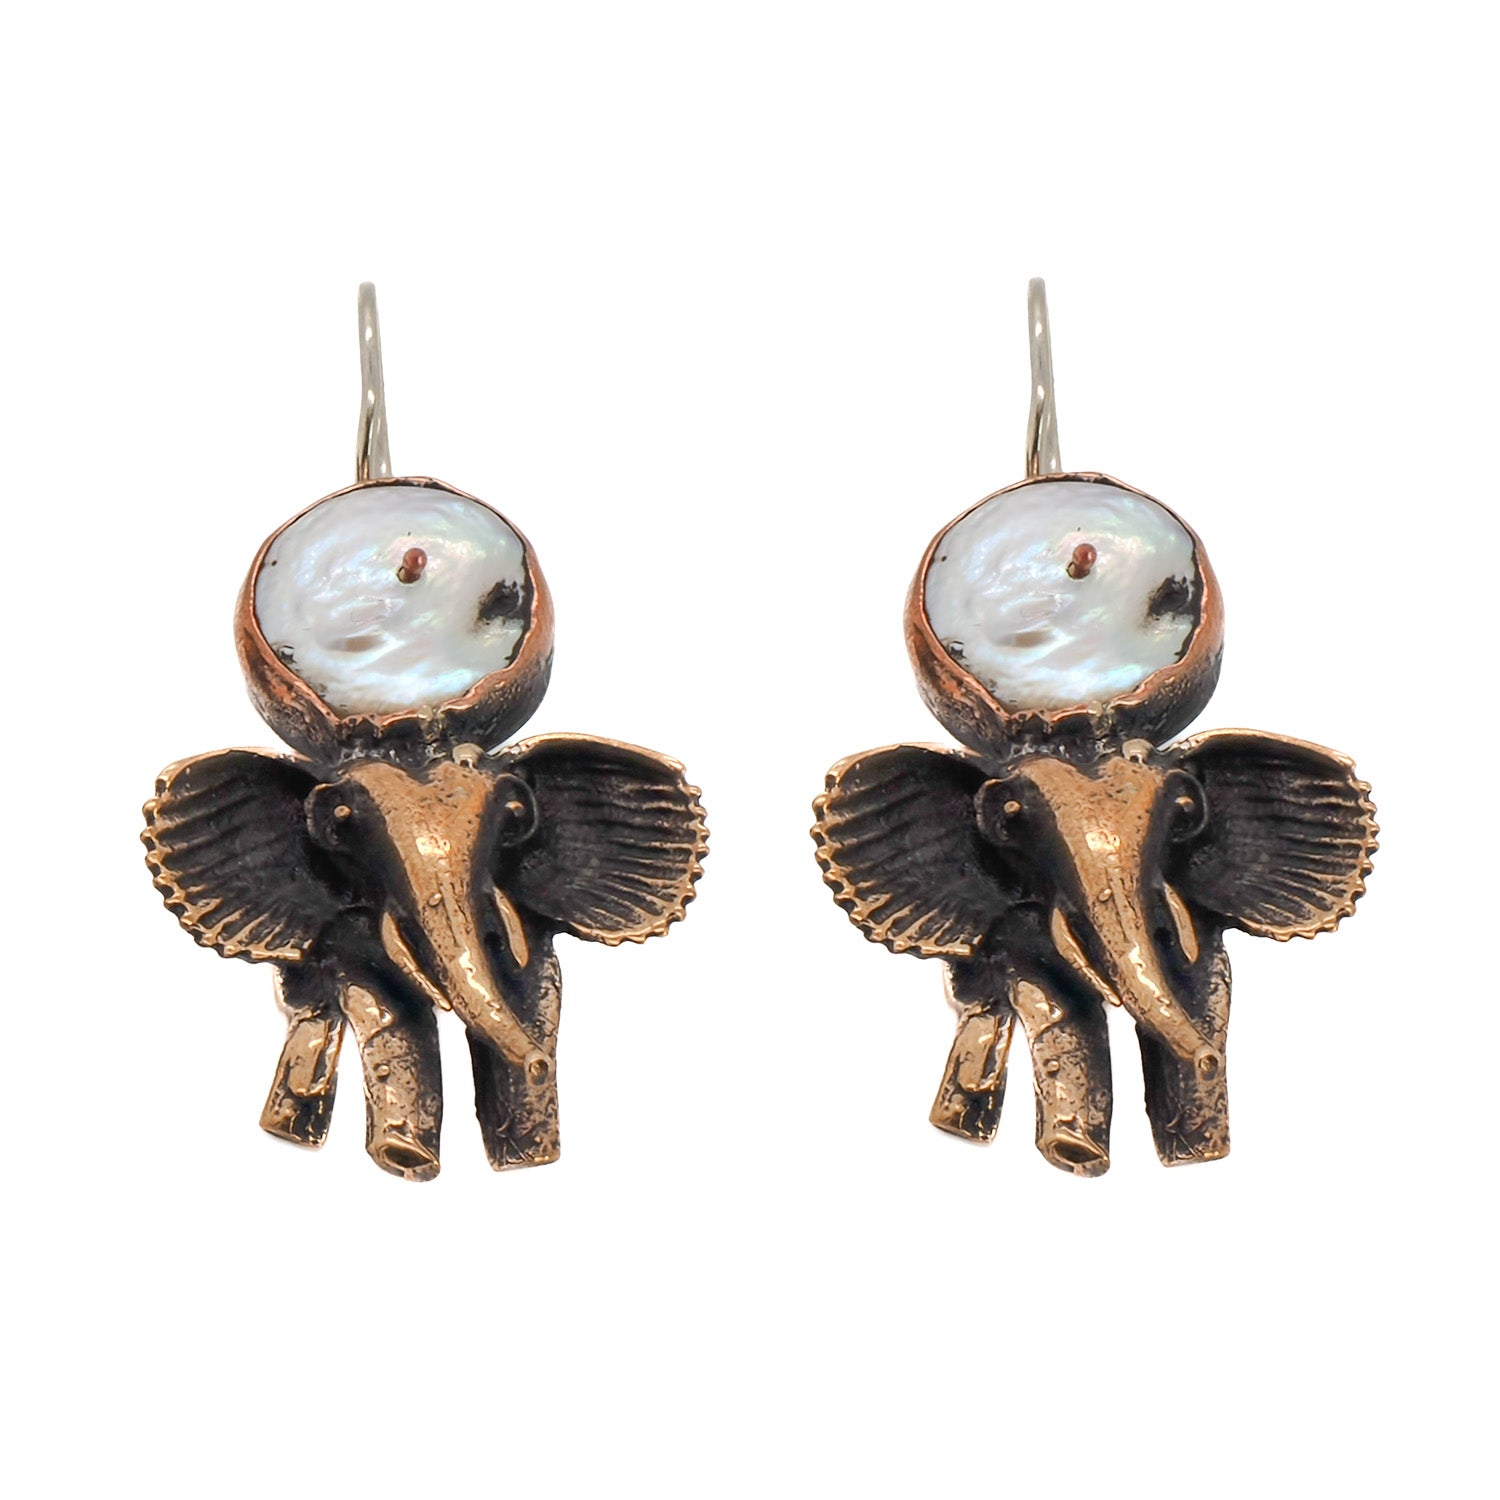 Close-up of the Handmade Unique Spirit Elephant Earrings, showcasing the intricate bronze elephant design and the lustrous pearl gemstone accent.